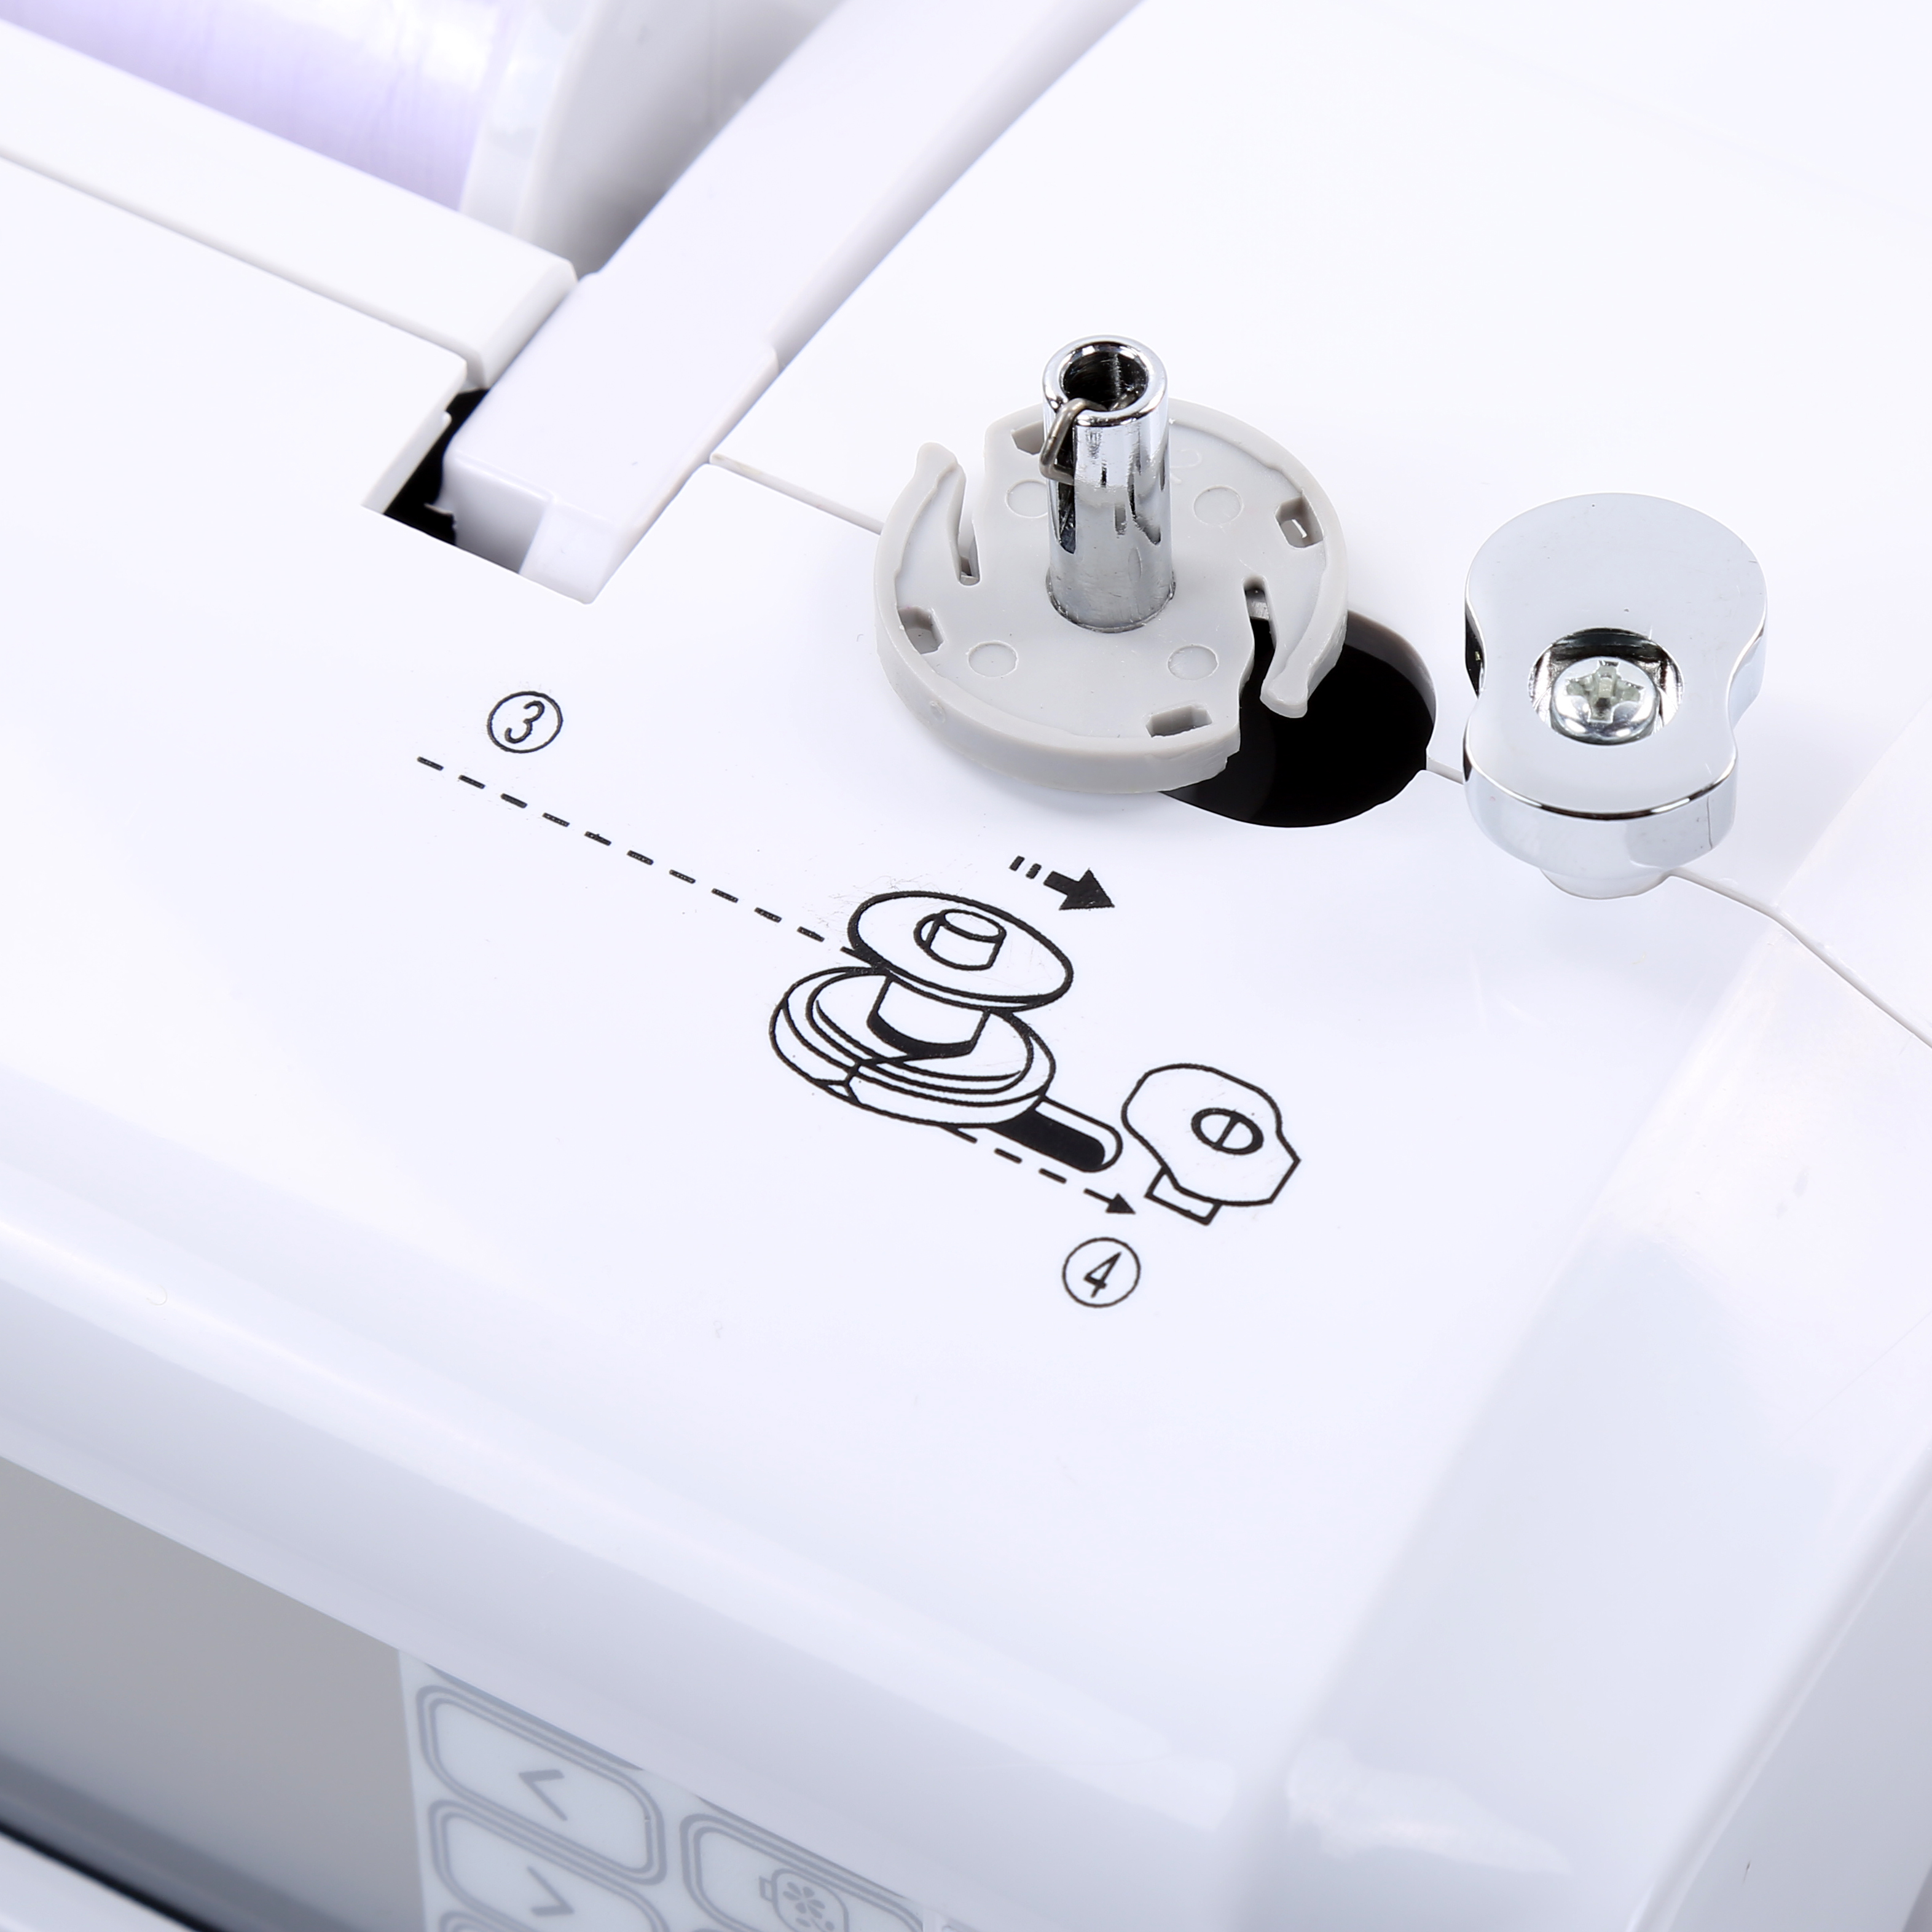 BAI Upholstery Sewing Machines Machine Online Embroidery And Sewing Machine for Home